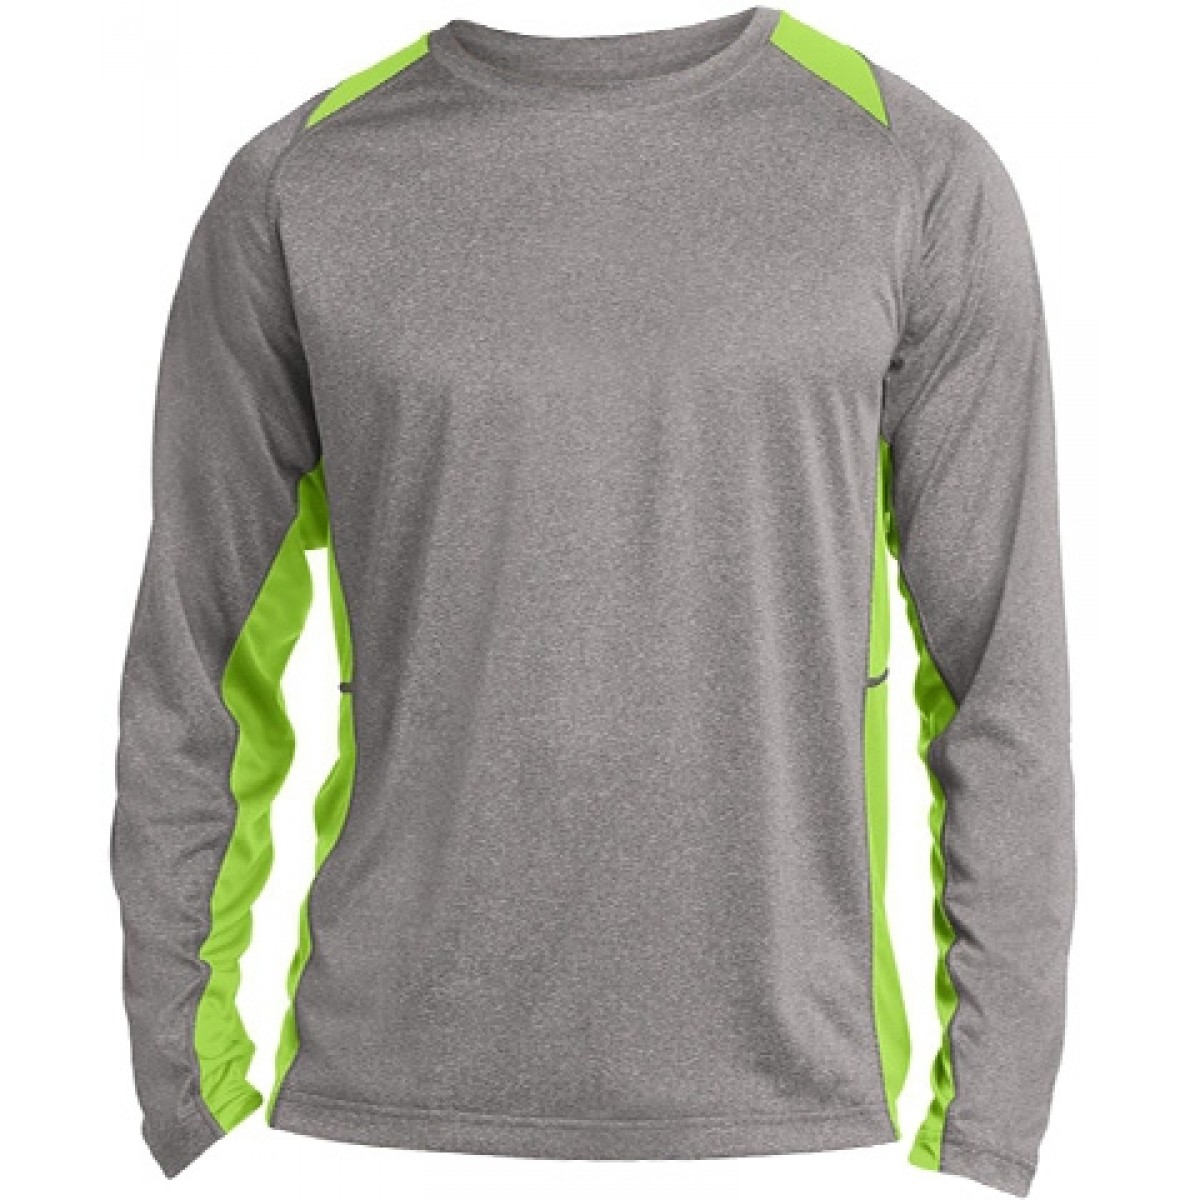 Long Sleeve Performance Tee / Gray w/ Green-Safety Green-S